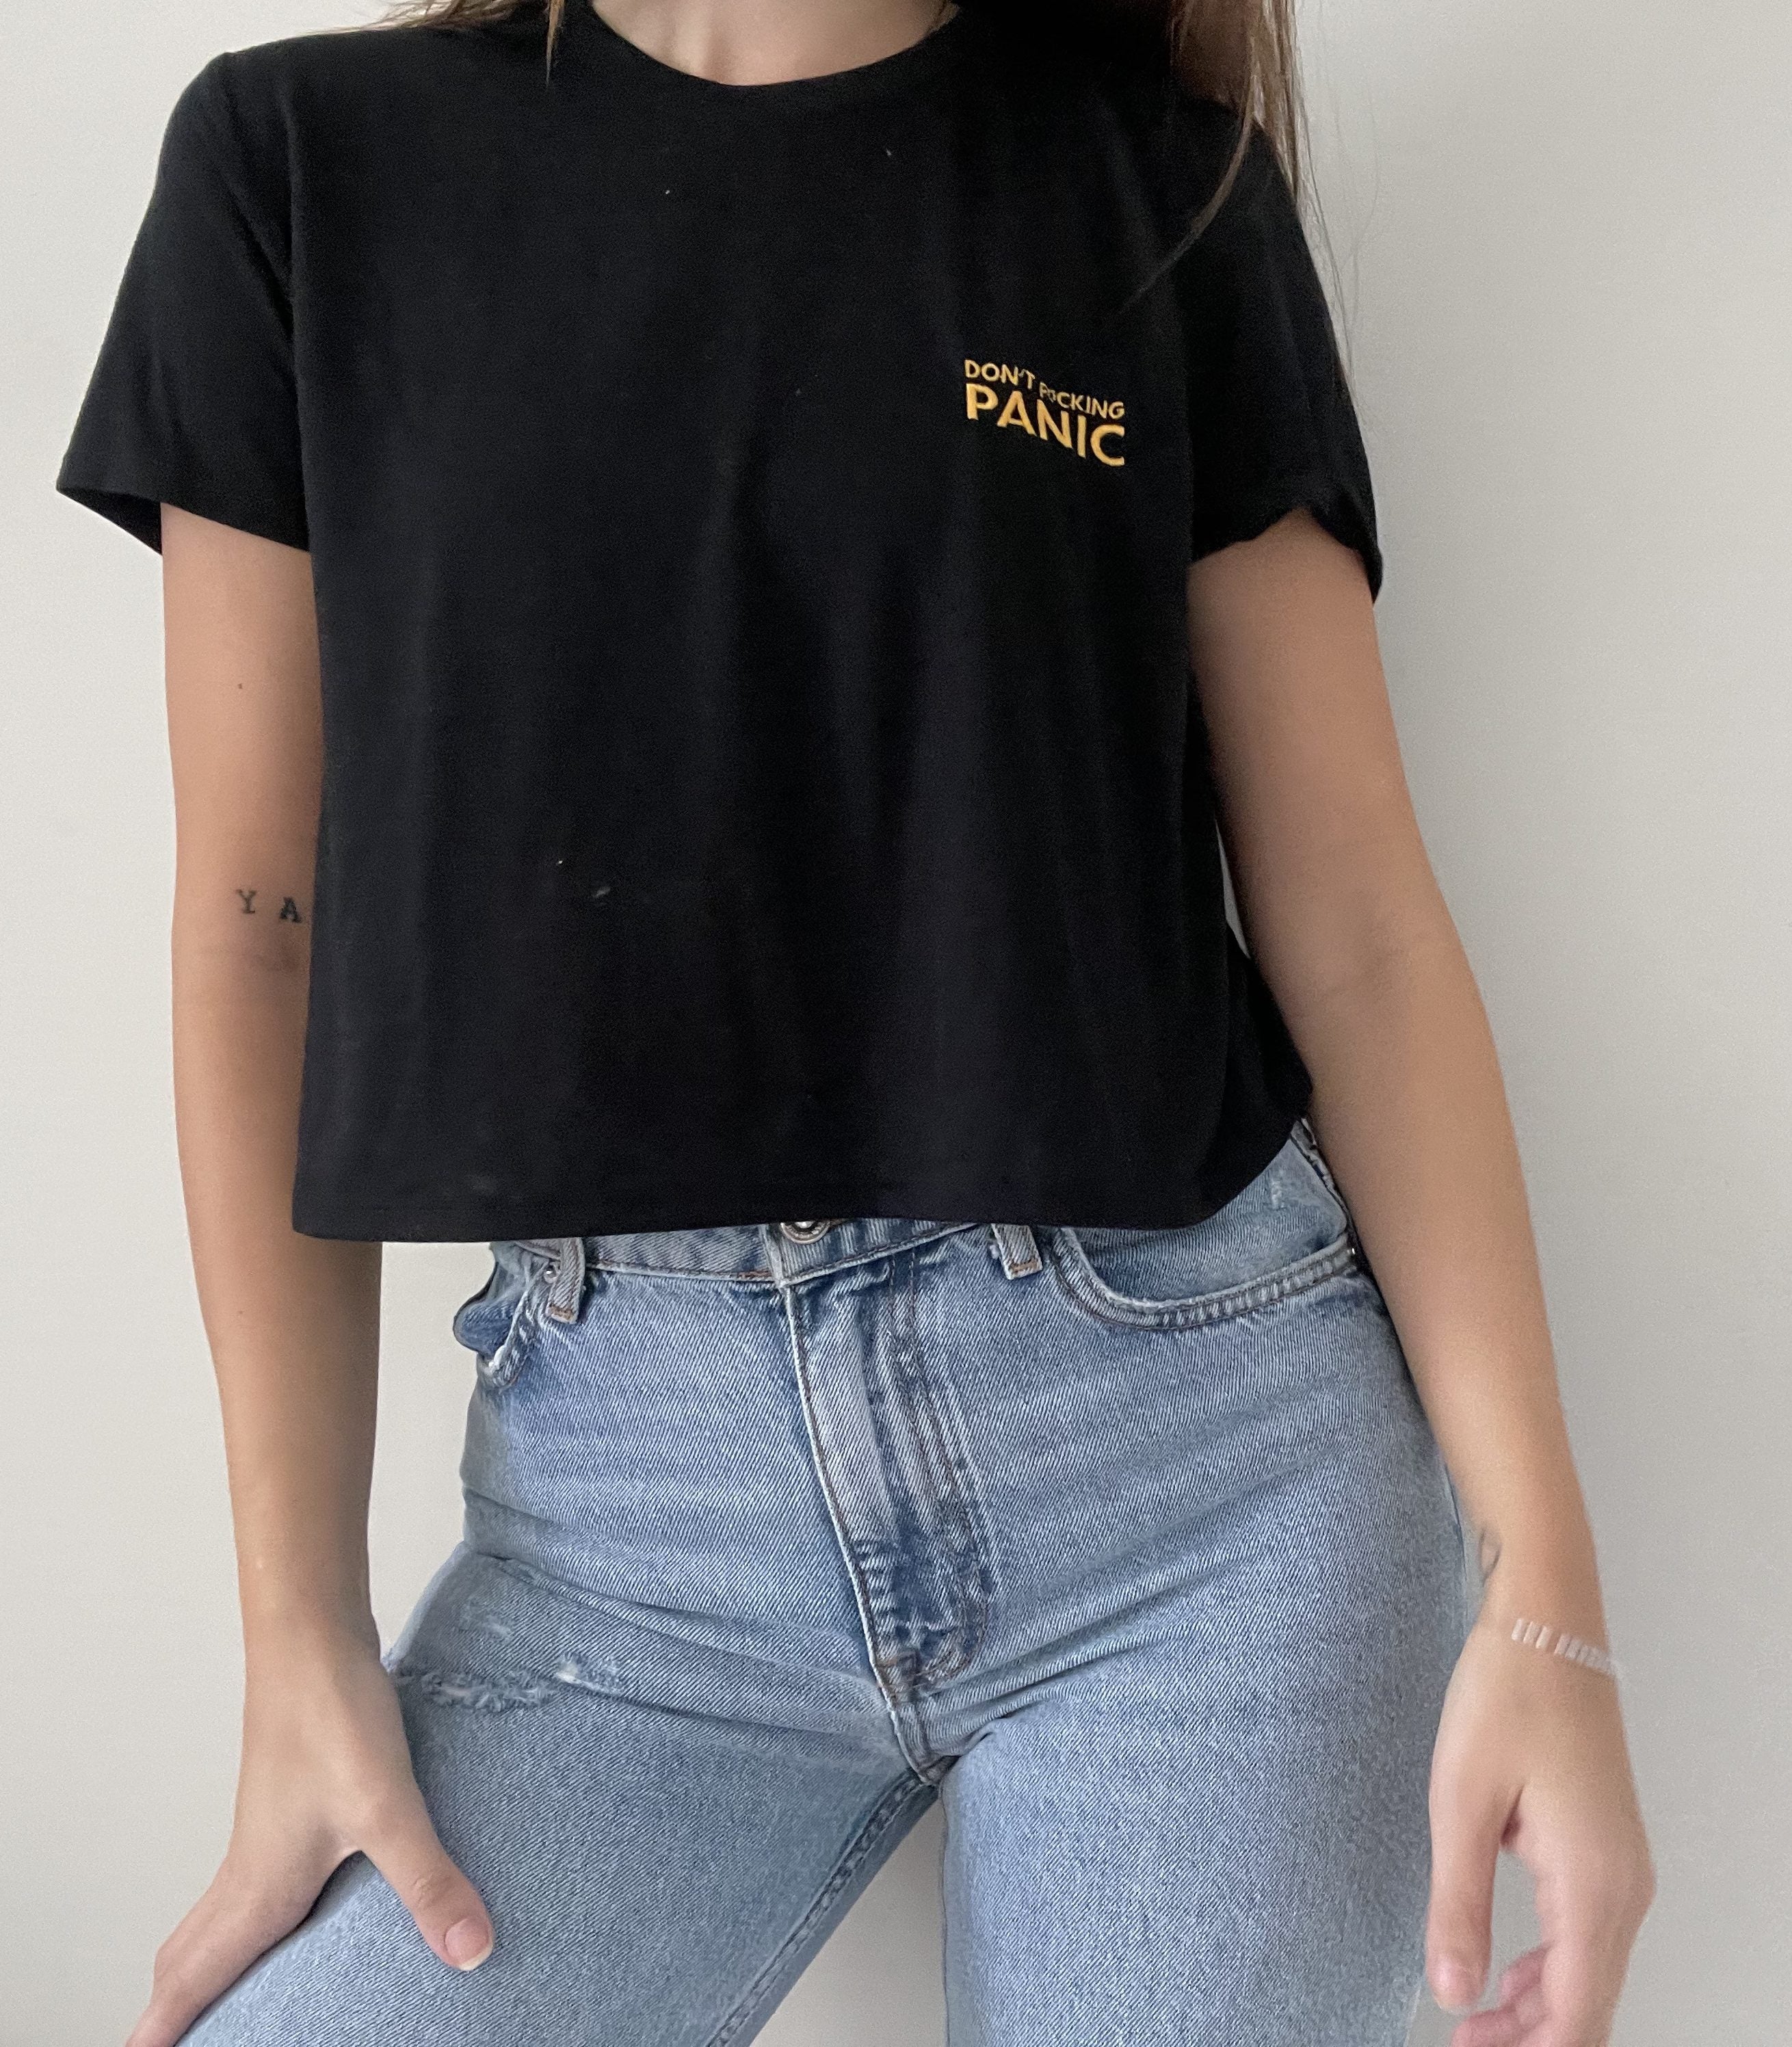 Don't F*cking Panic Crop Top by Kelsey Darragh | Shop Catalog